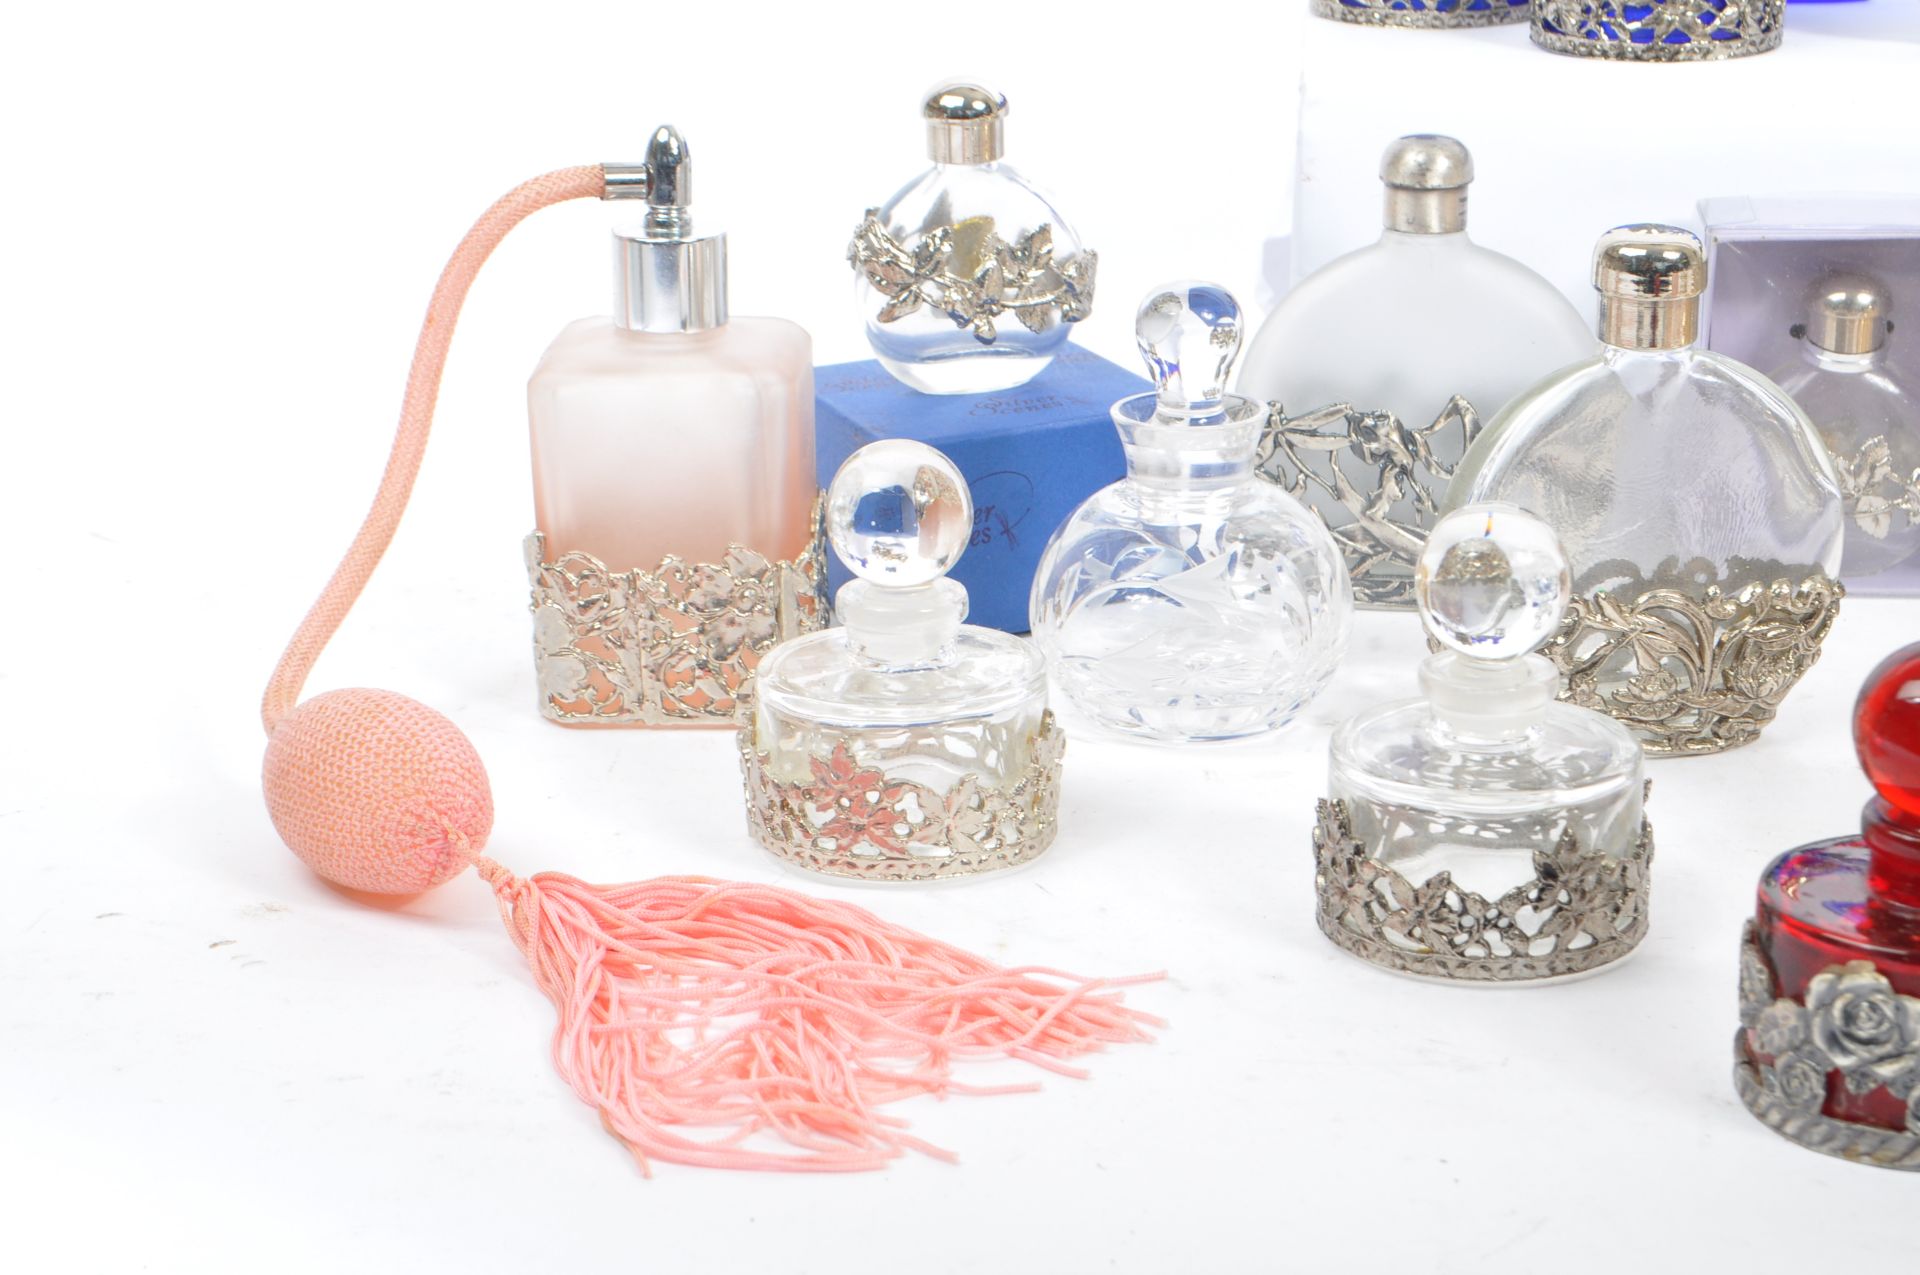 COLLECTION OF PERFUME FRAGRANCE BOTTLES - Image 2 of 10